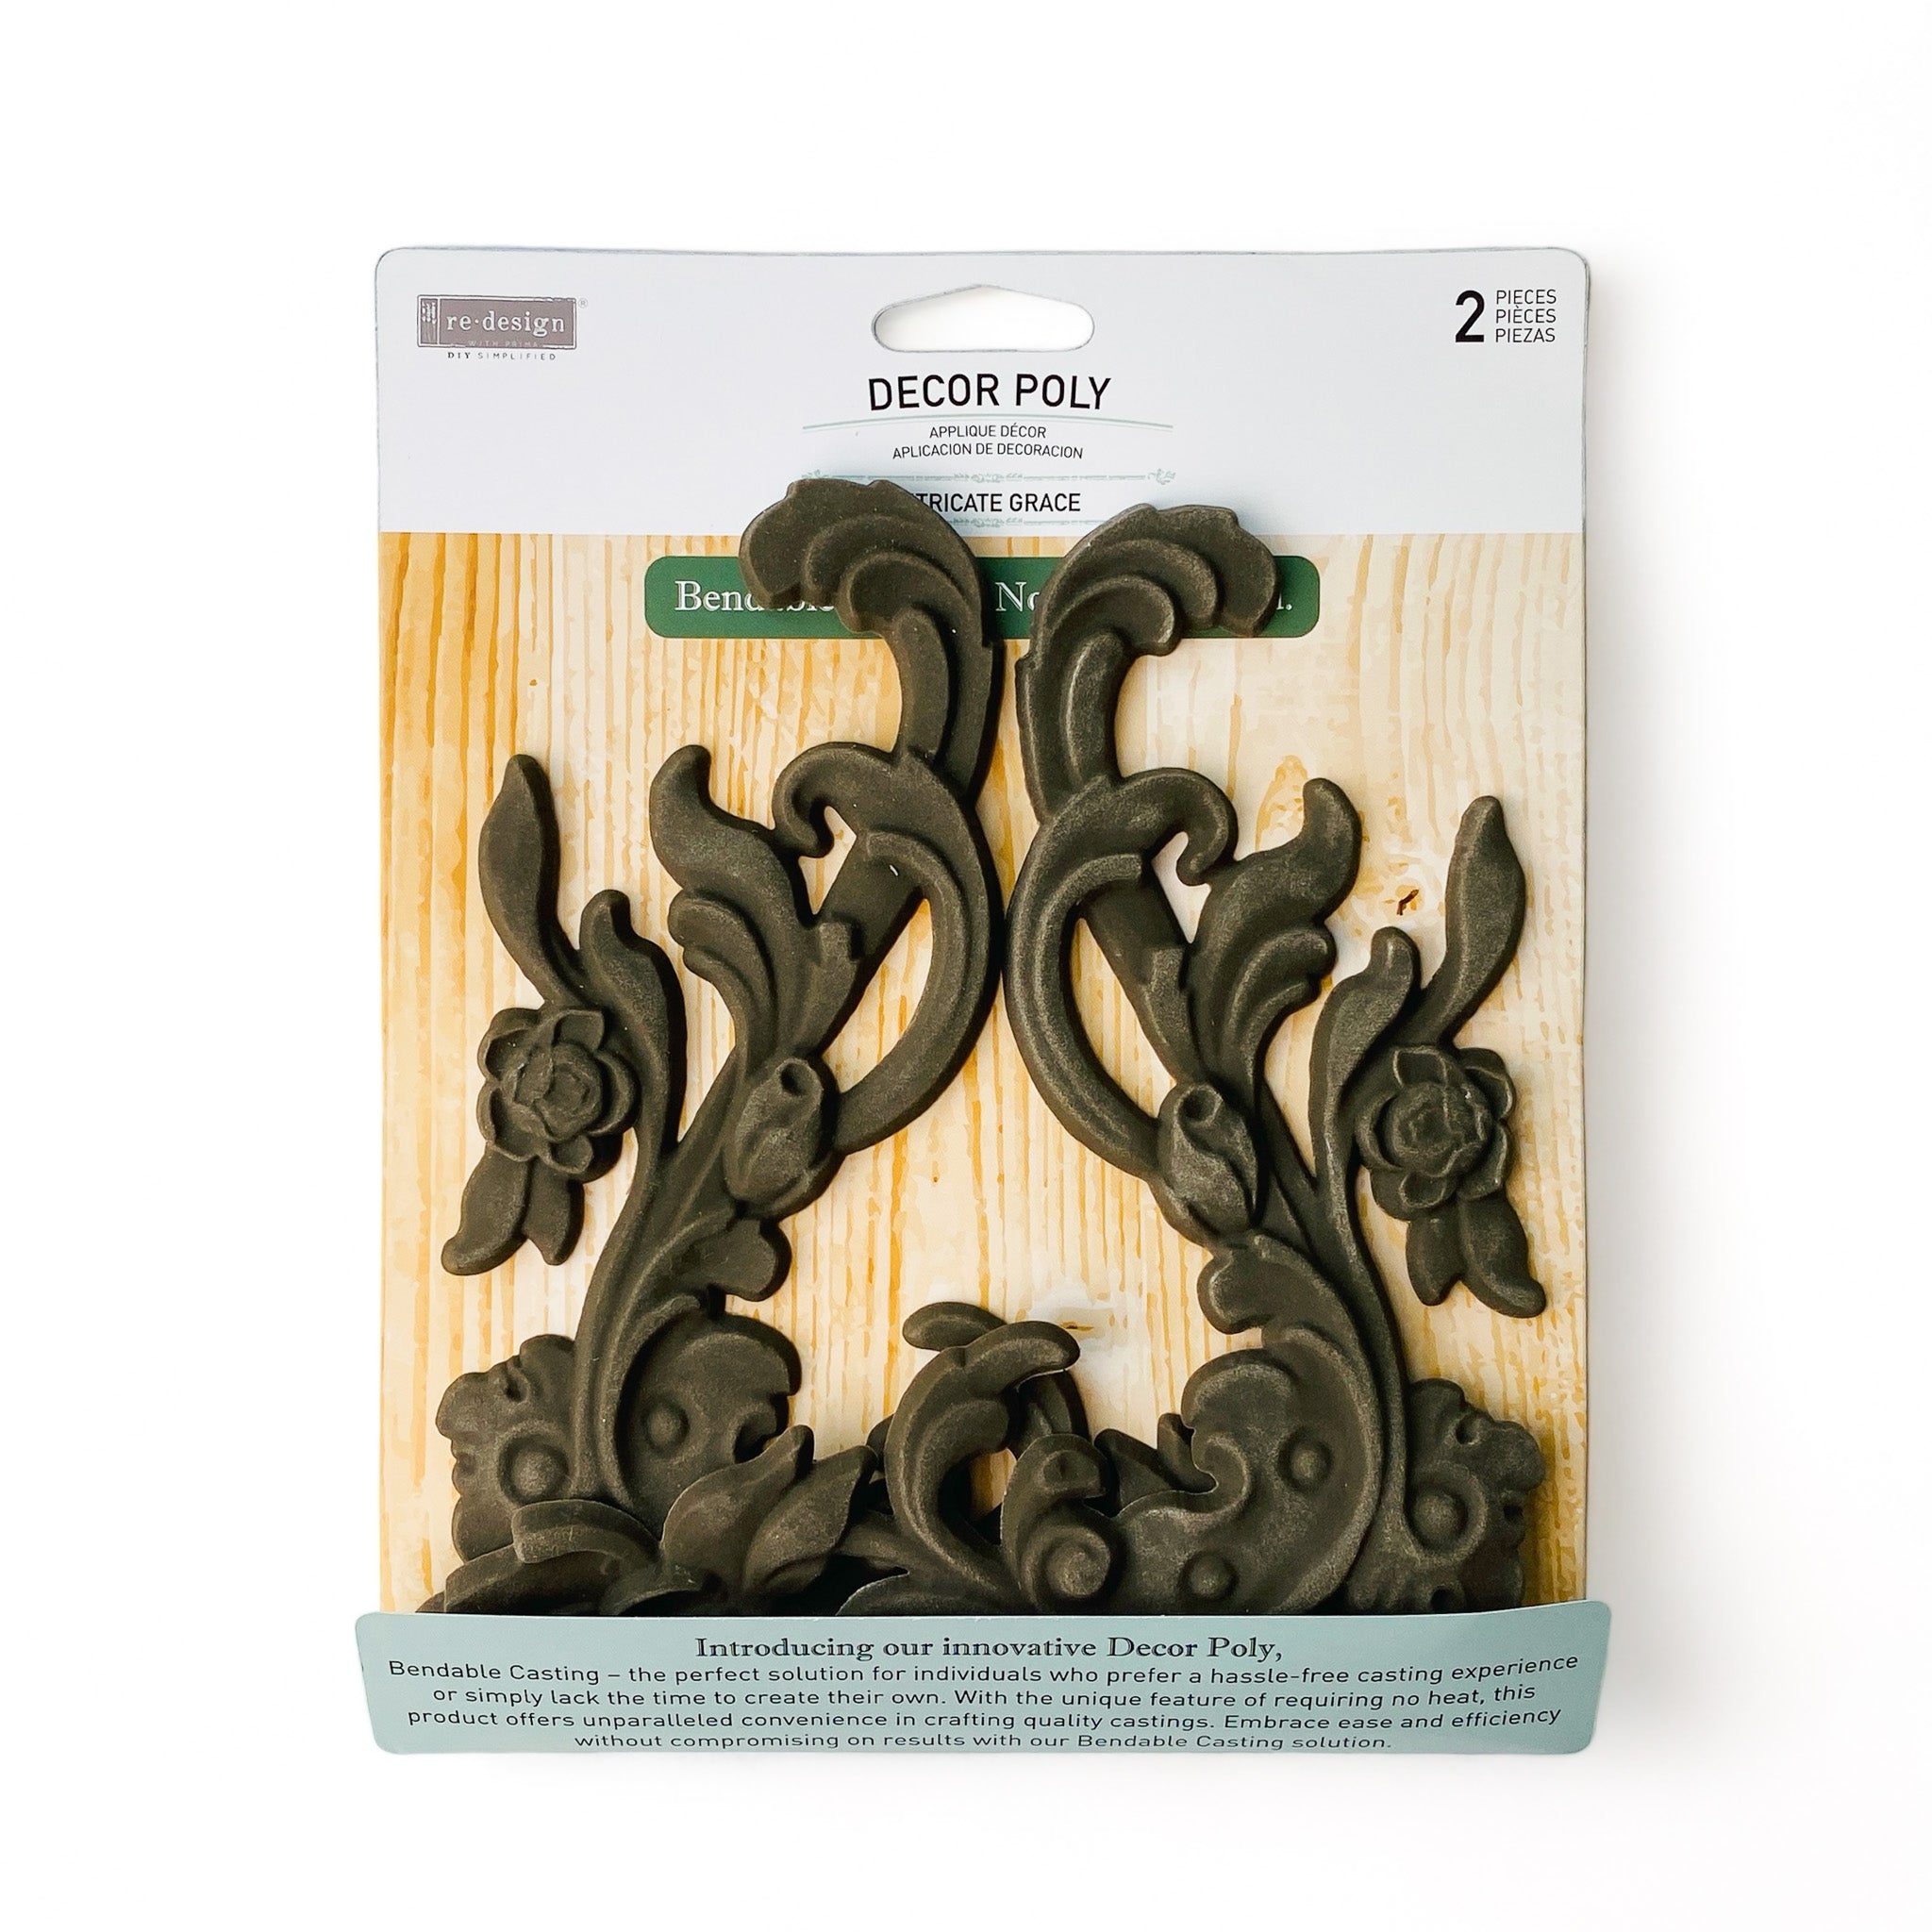 A package of ReDesign with Prima's Intricate Grace Decor Poly Casting is against a white background.